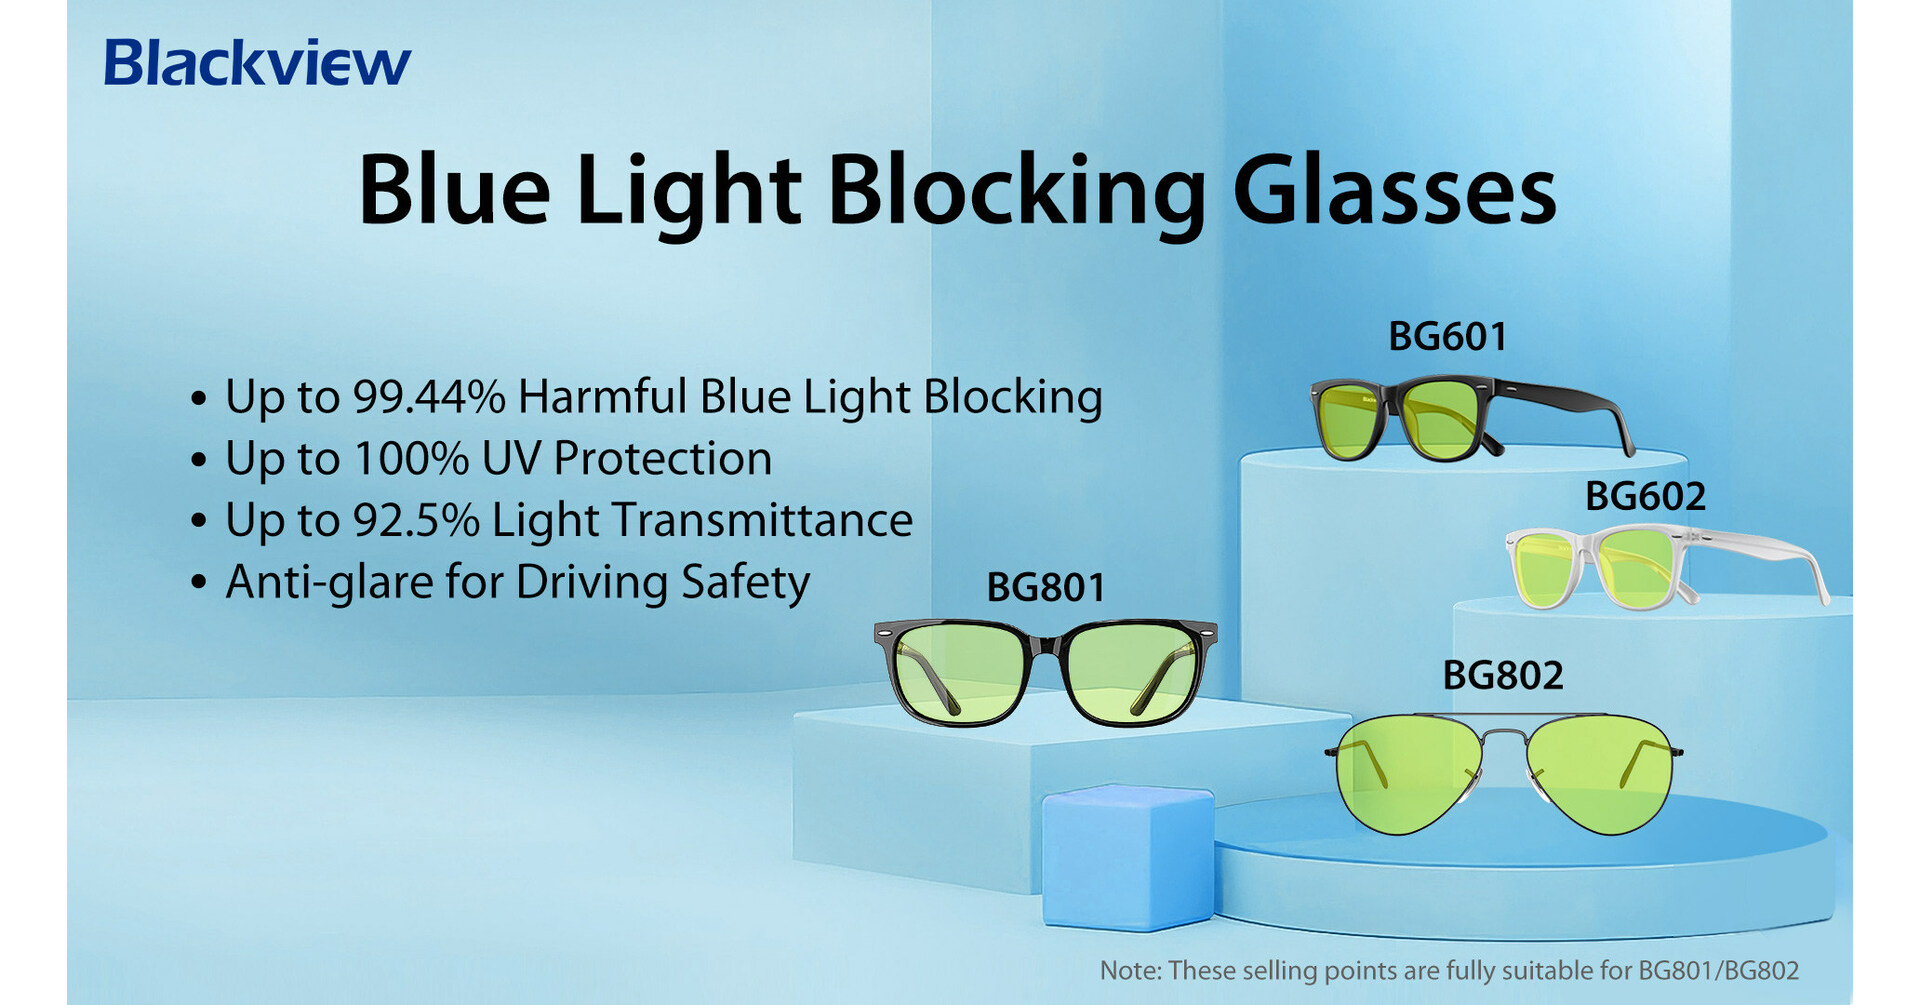 Blackview Launches the World's First 99.44% Anti Blue Light Glasses - Say  No to Eye Problems